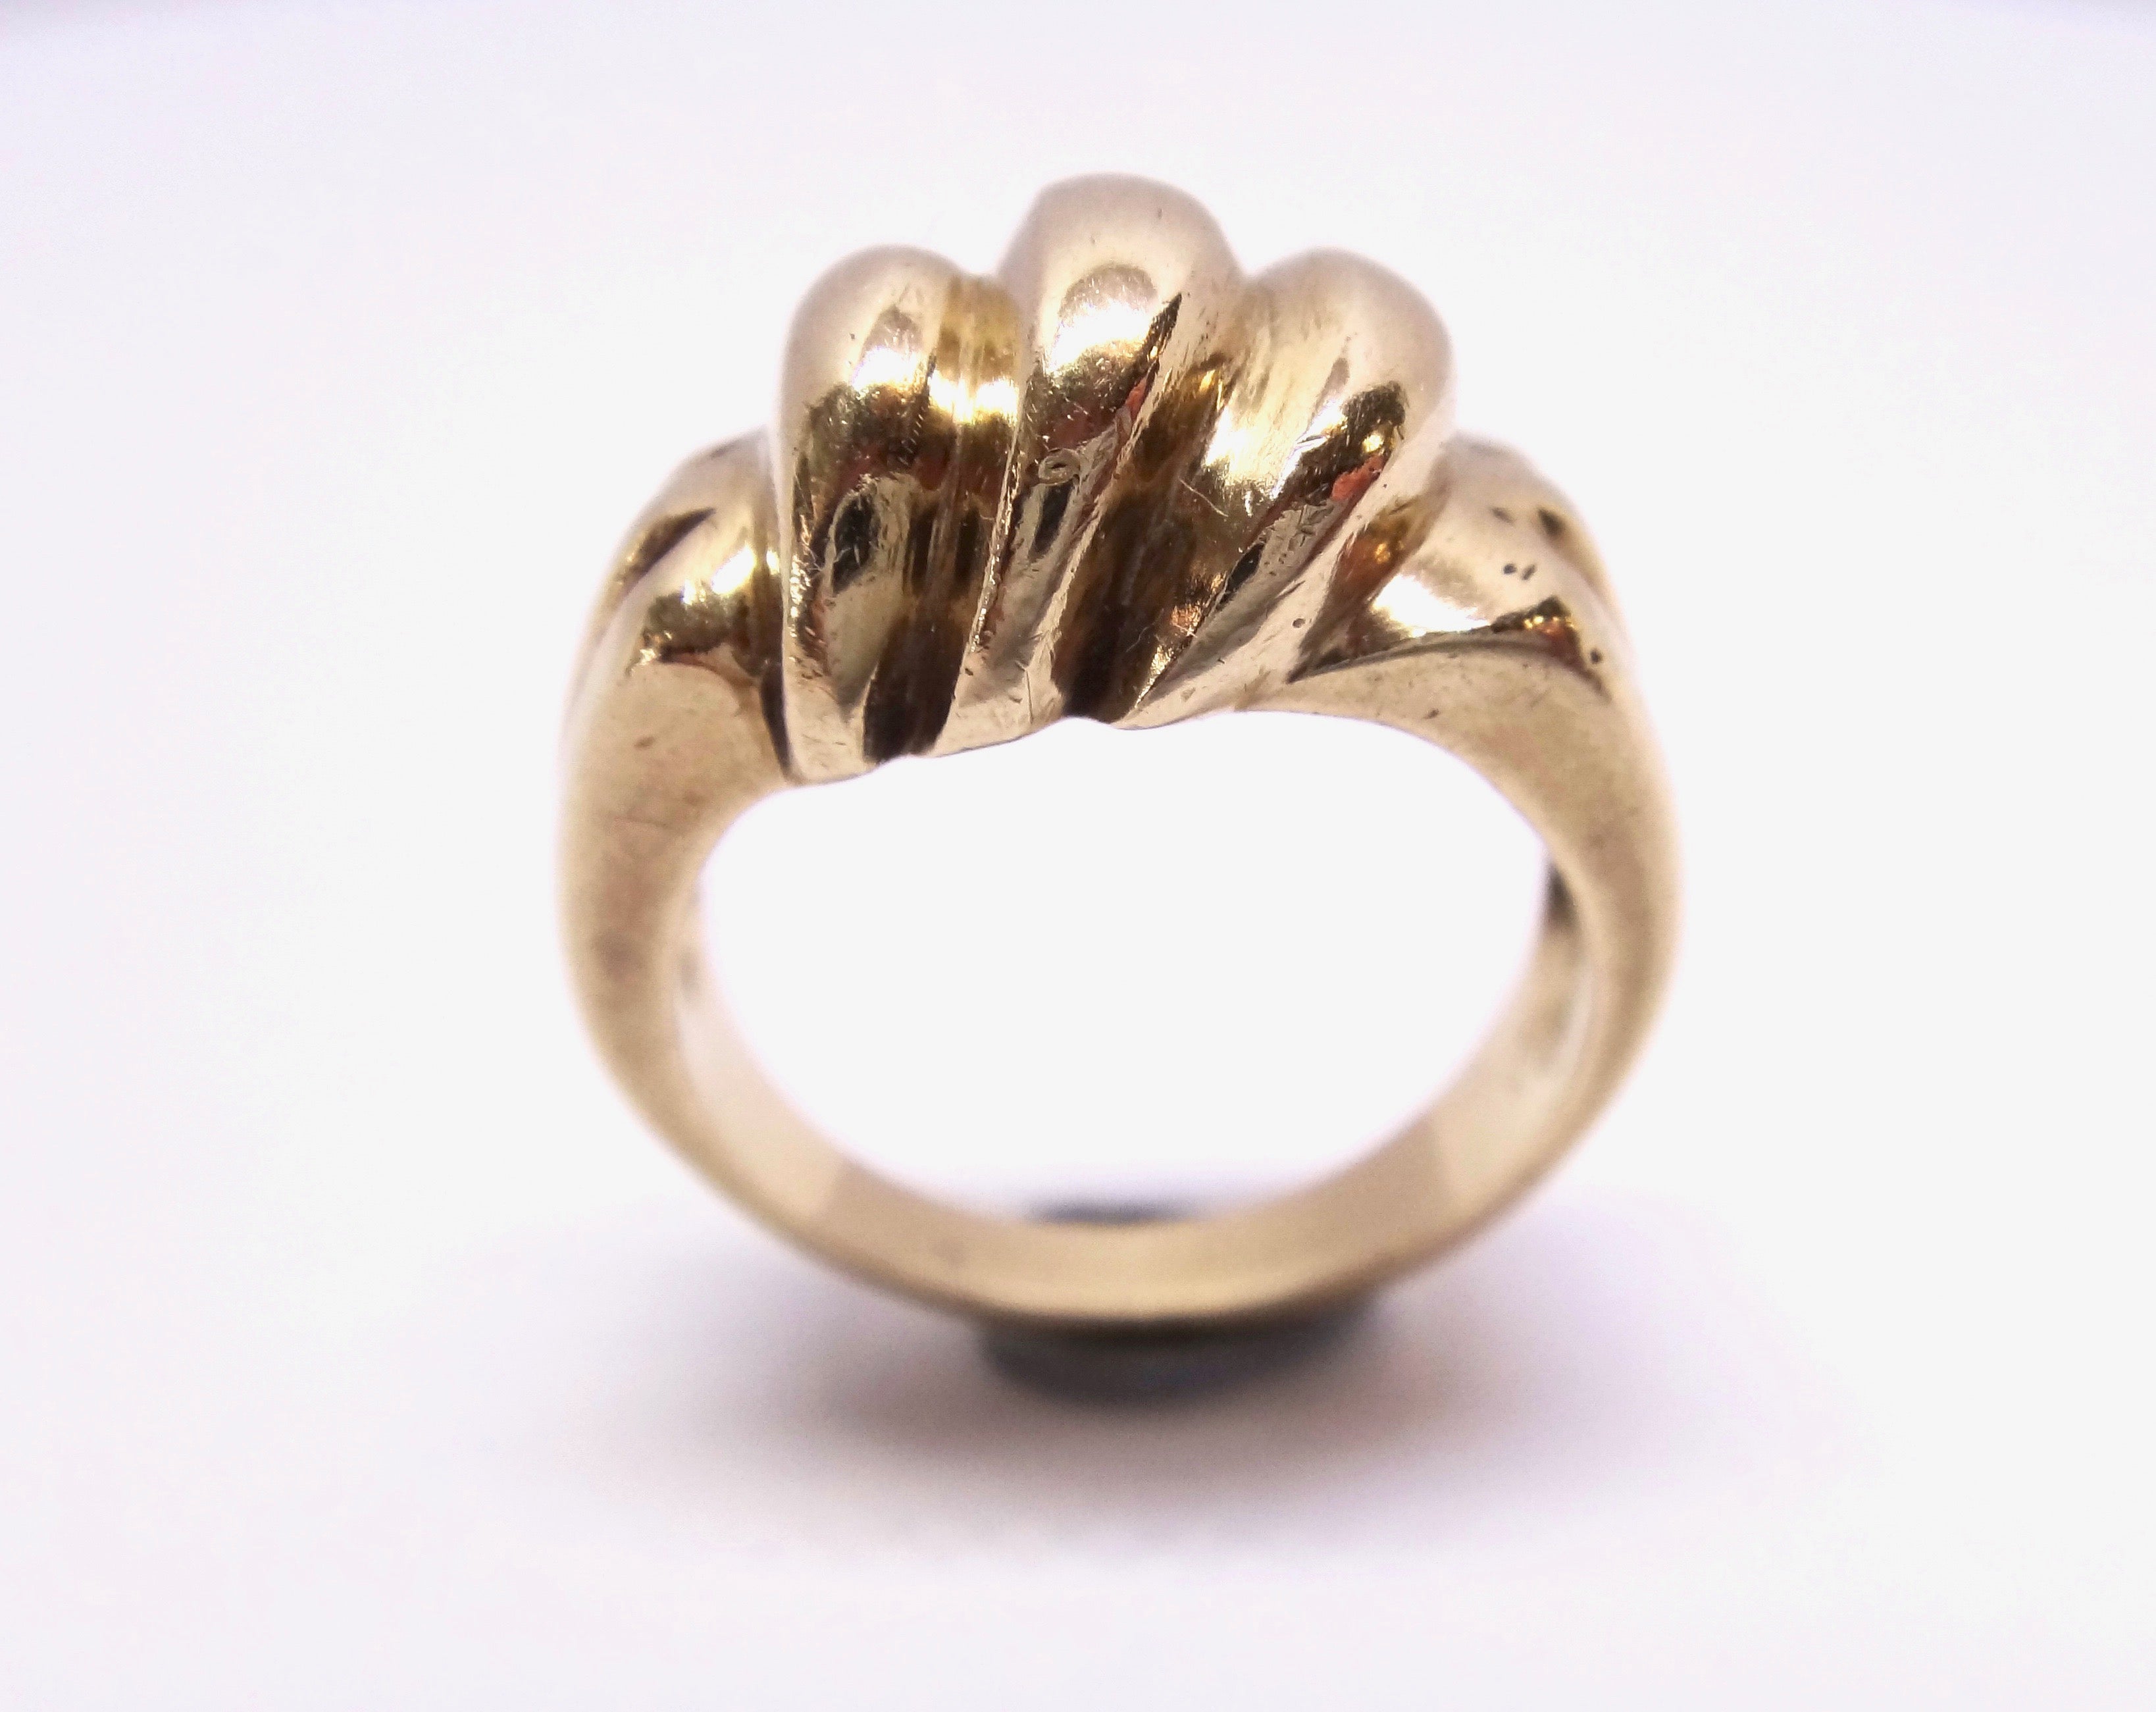 Heavy 9CT Yellow GOLD Swirl Patterned Ring